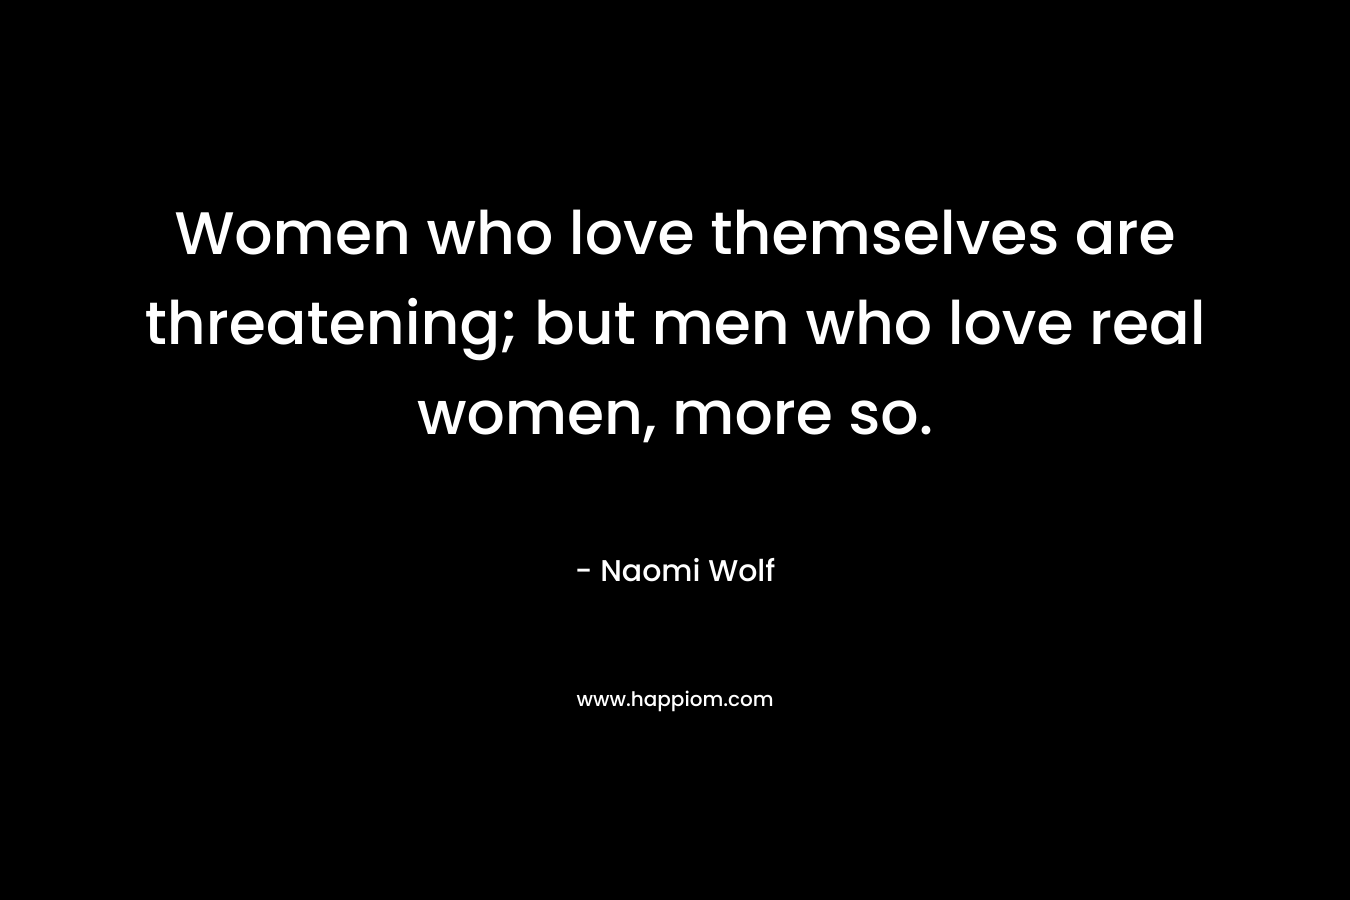 Women who love themselves are threatening; but men who love real women, more so.